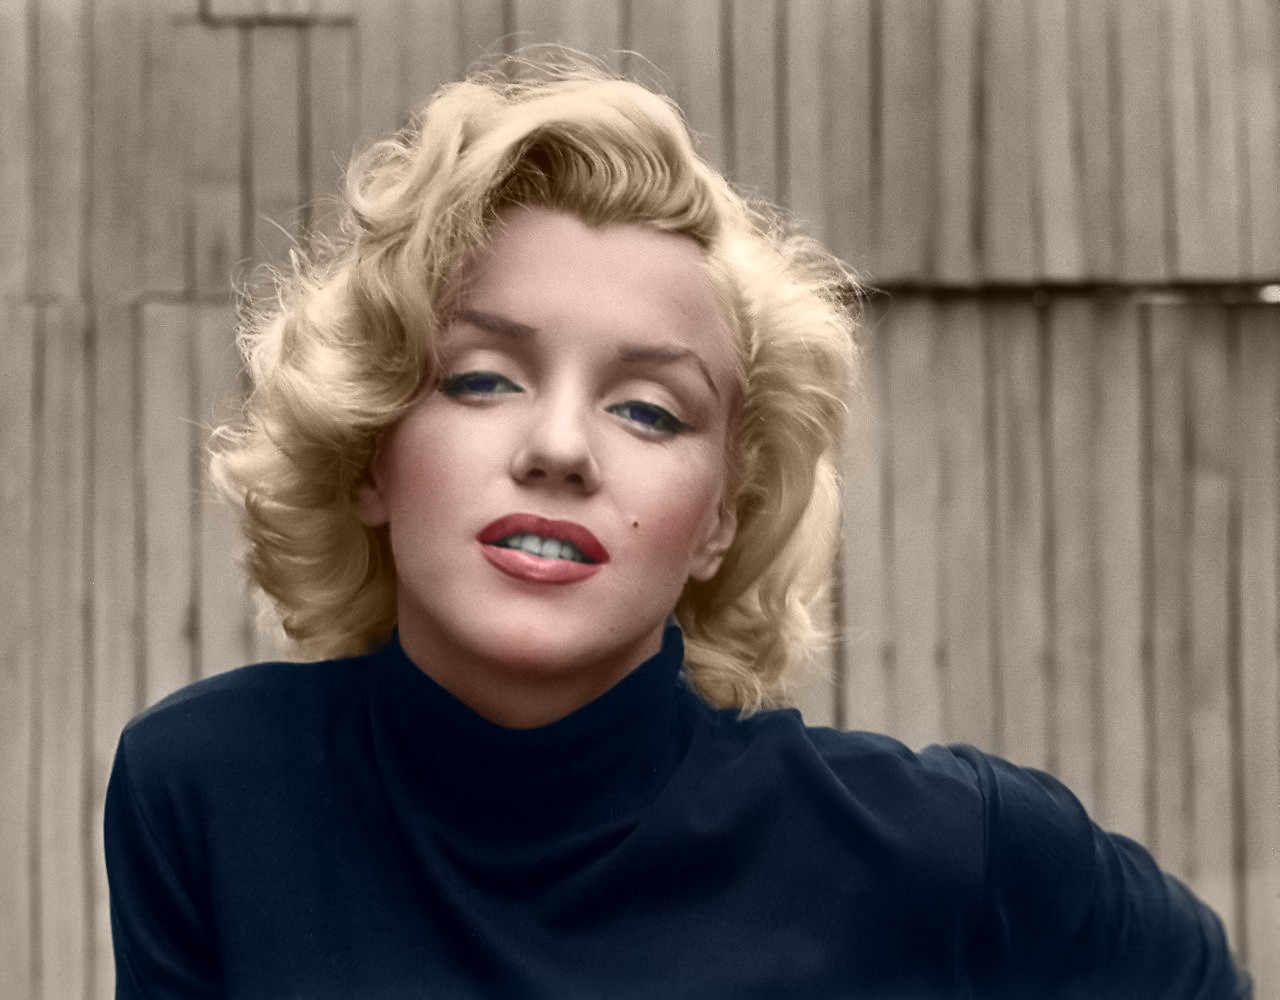 Colorized from this Shorpy original. Another Marilyn Monroe yes but such an iconic image I couldn't resist having a go at it. View full size.